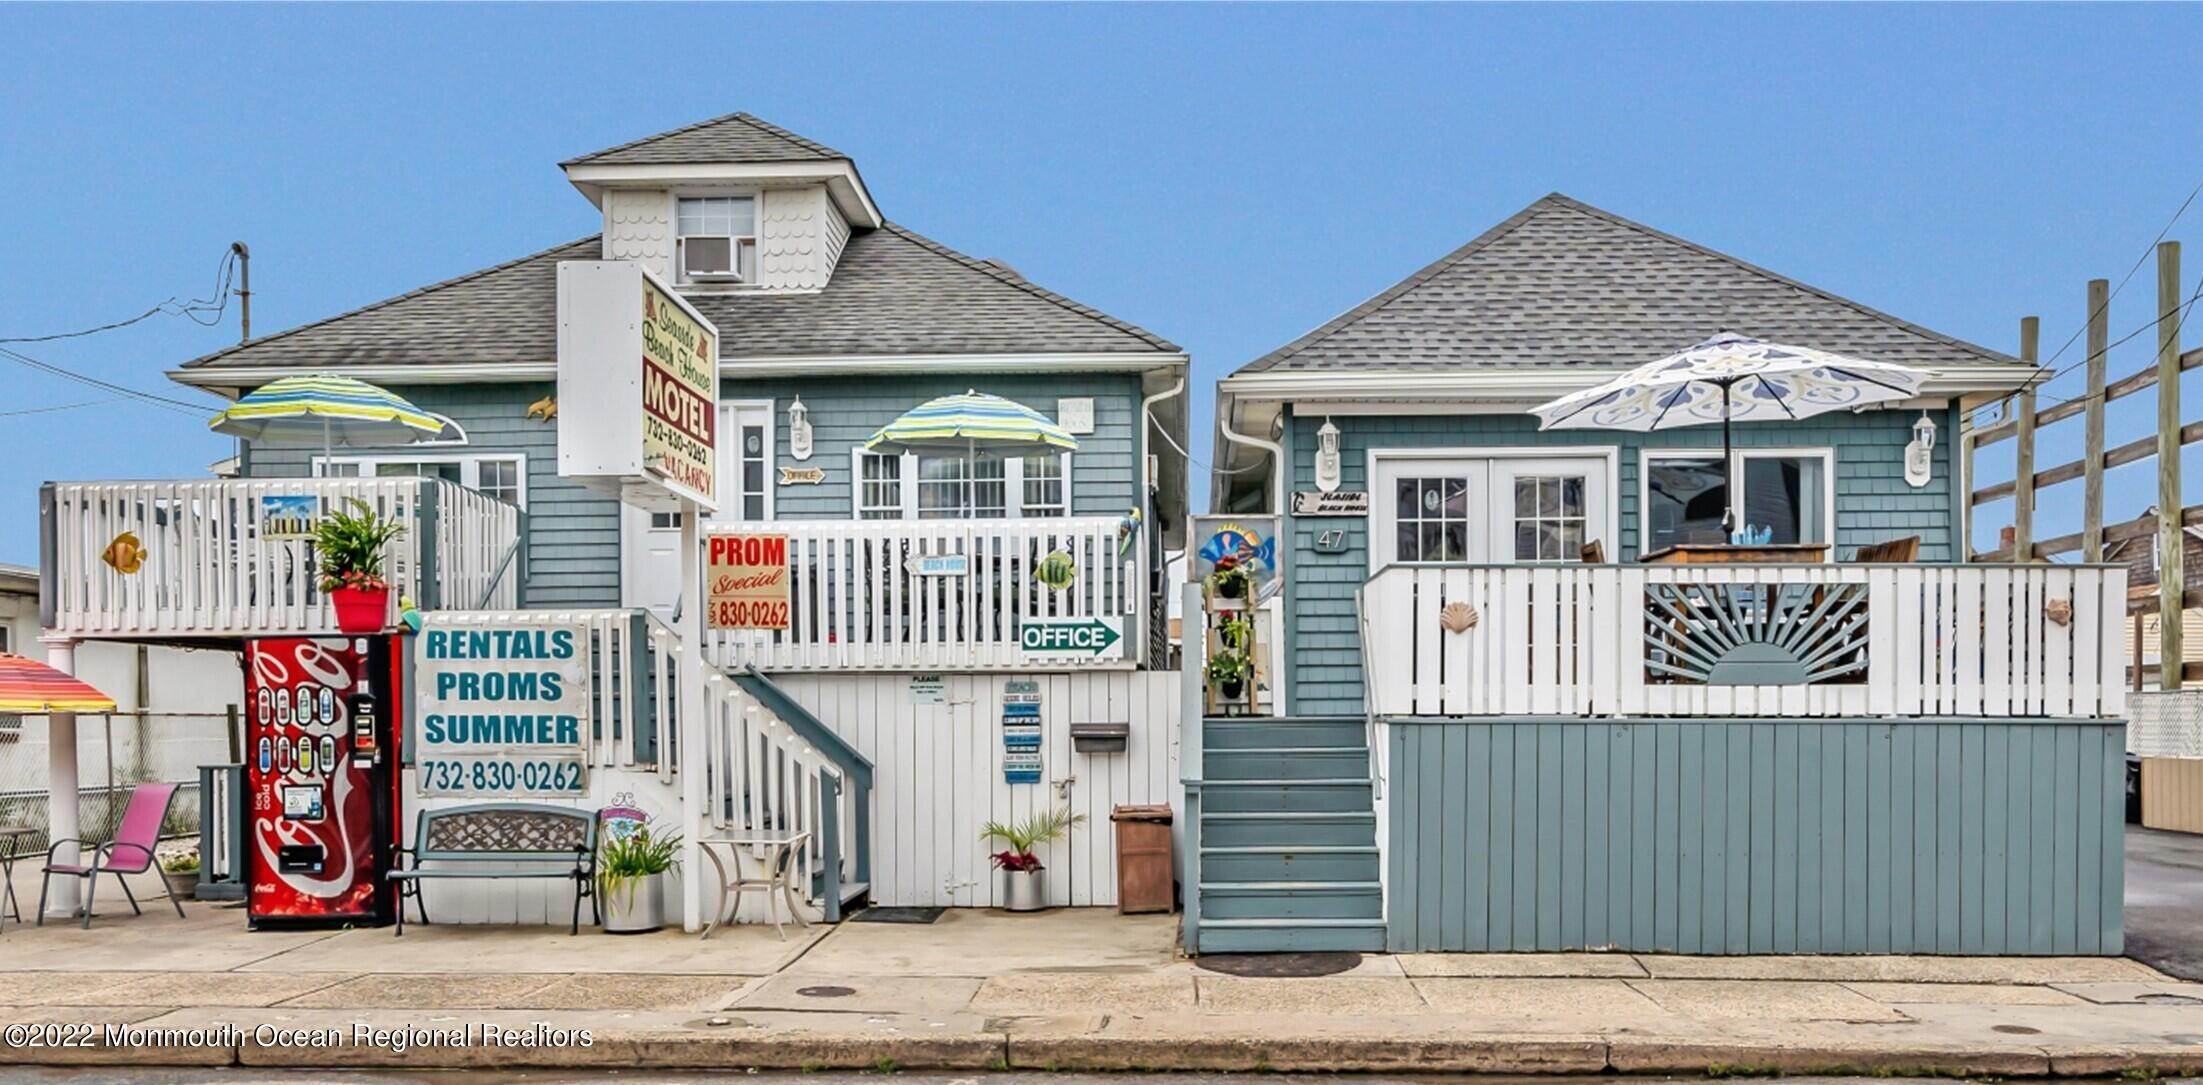 Property for Sale at 45 & 47 Hamilton Avenue Seaside Heights, New Jersey 08751 United States